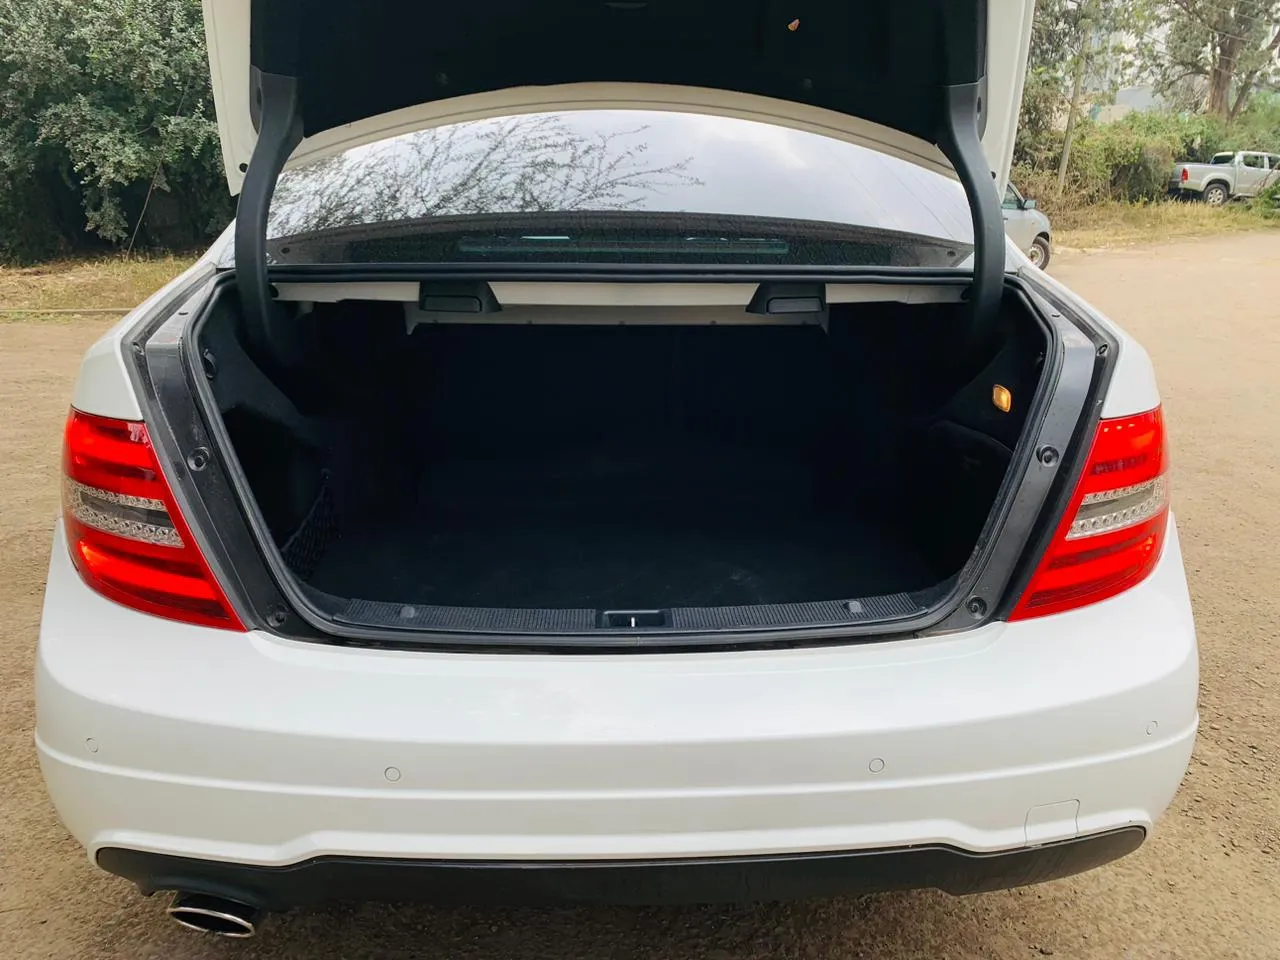 Mercedes Benz C180 2013 leather Trade in OK